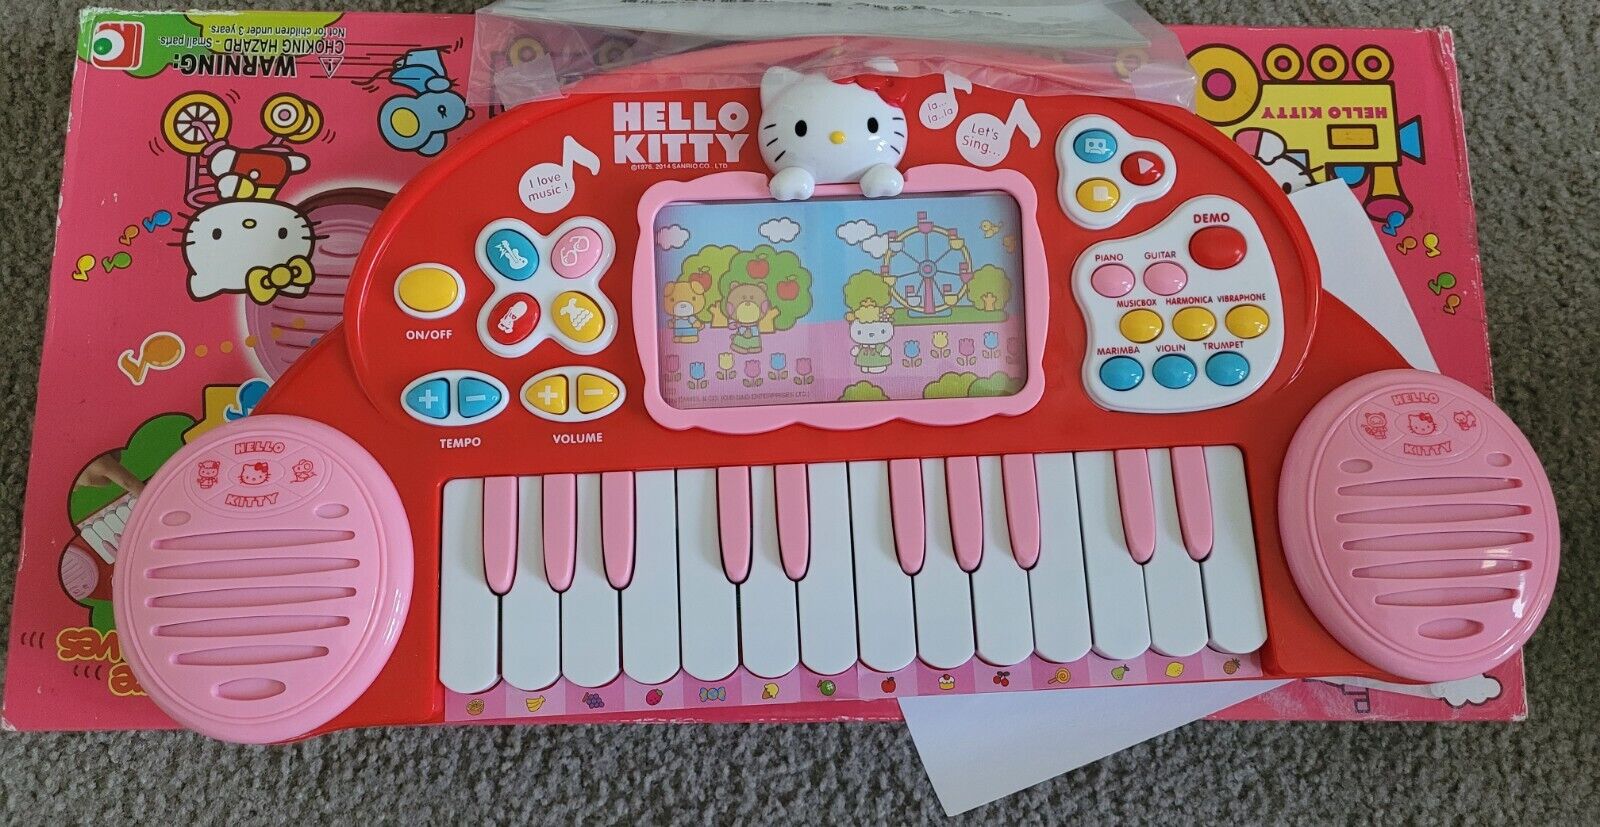 RARE 2007 Hello Kitty Electronic Piano Collectable Toy with BOX & Manual + Music